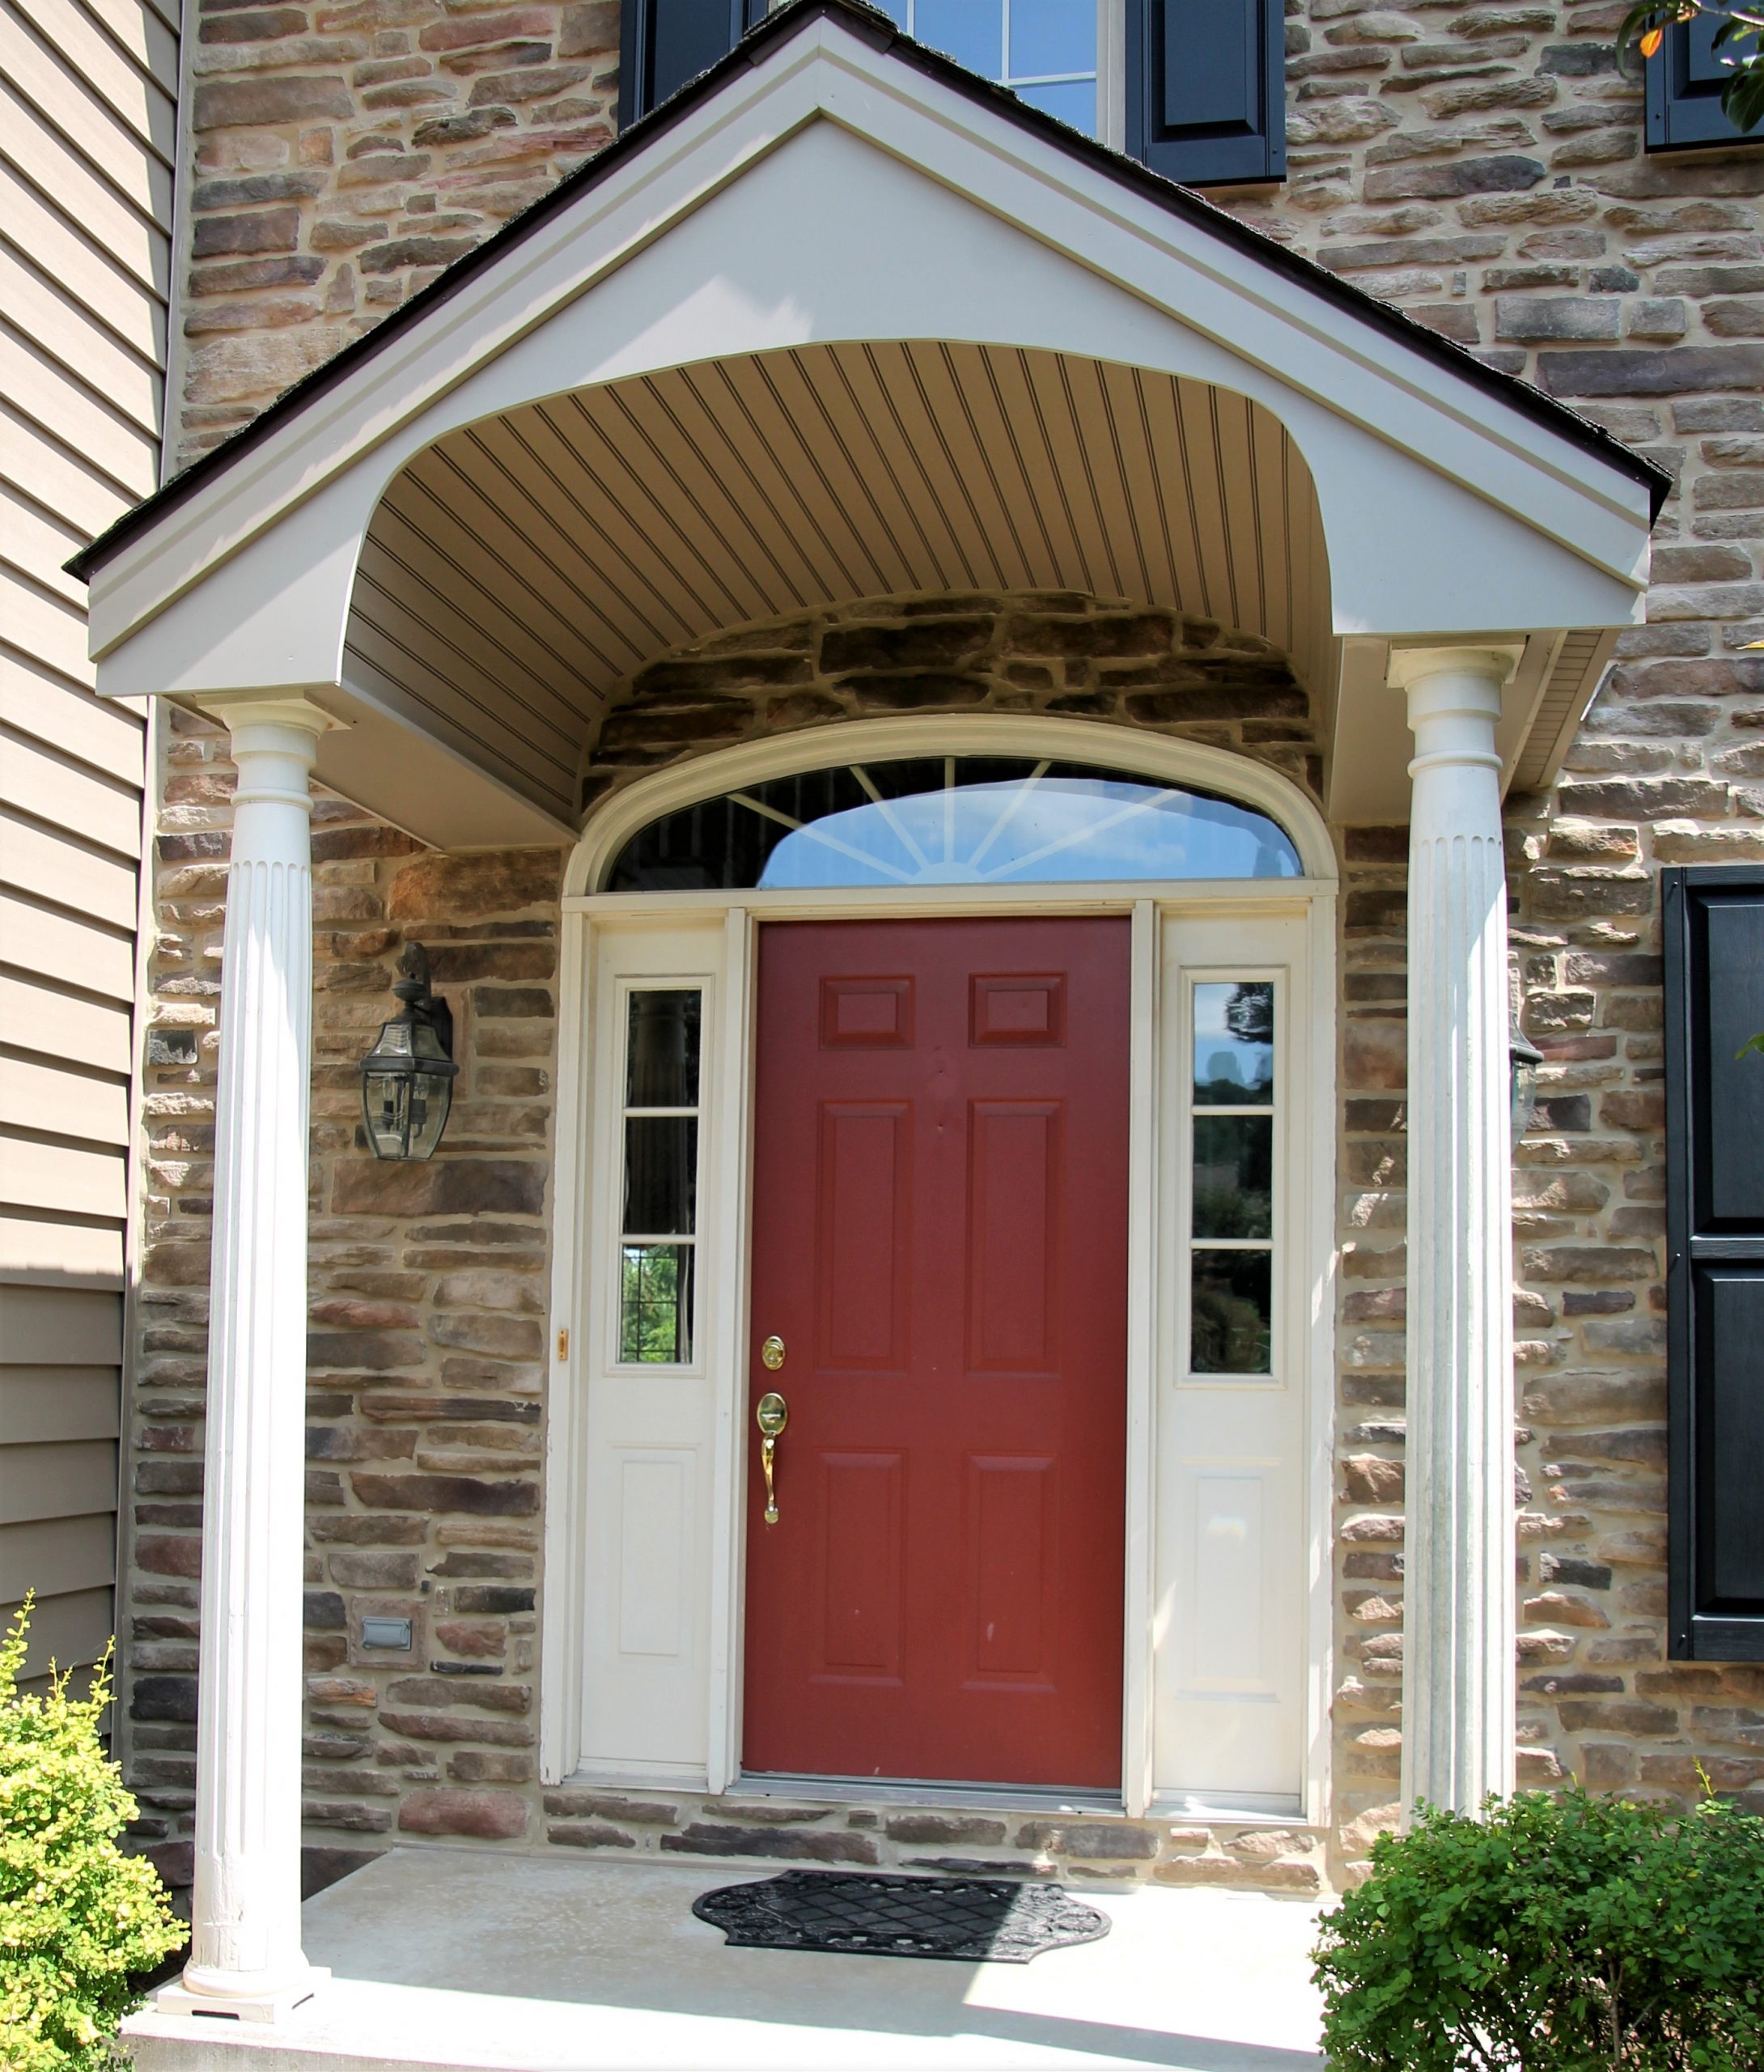 Exterior of home with a red front door with awning